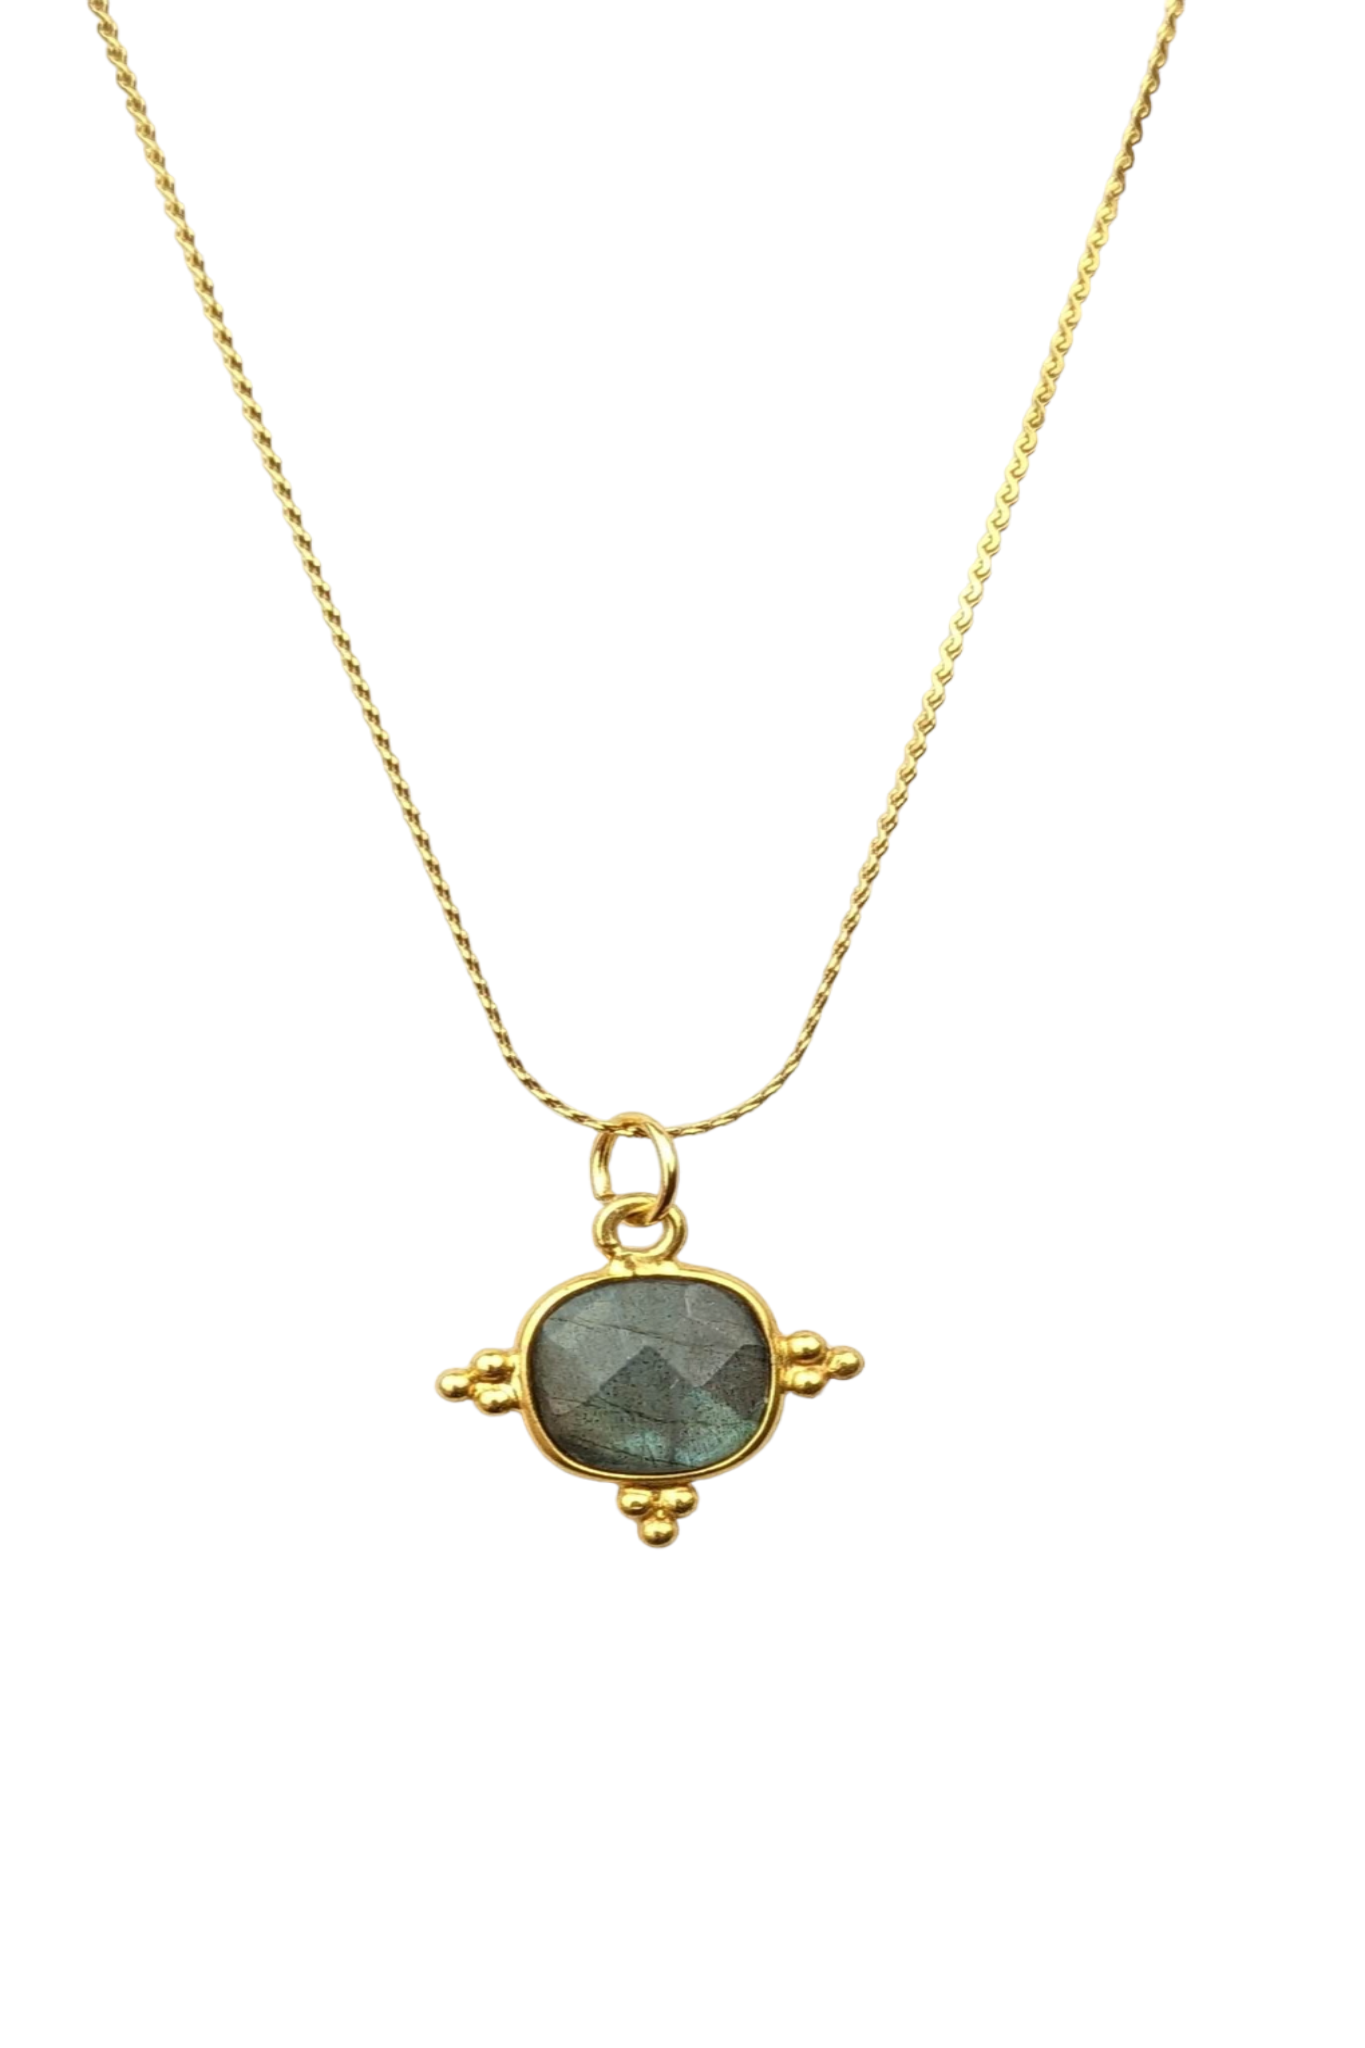 Aura alignement prevent energy leakage Crown Chakra pendant necklace stay gold by mme bovary